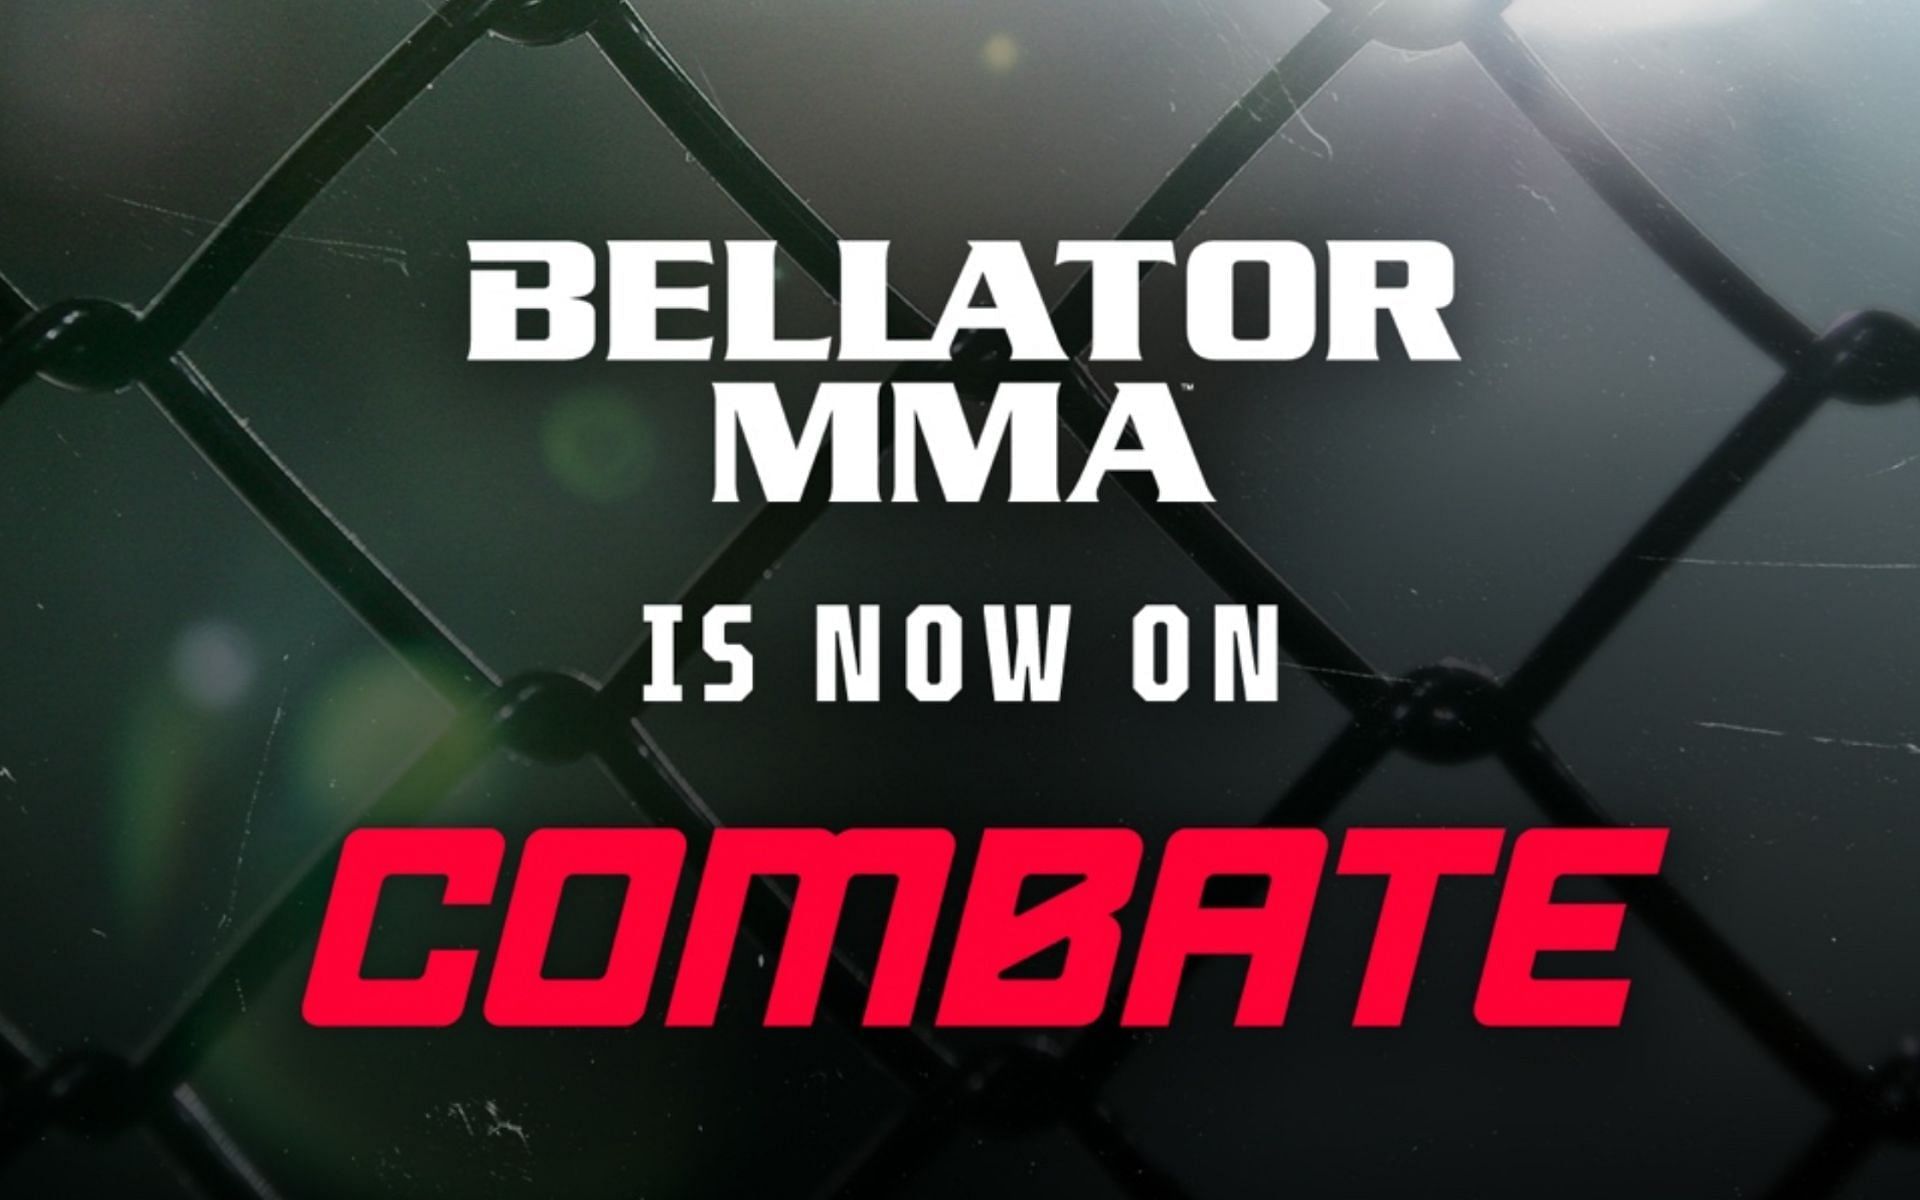 Bellator to stream on Combate from this weekend